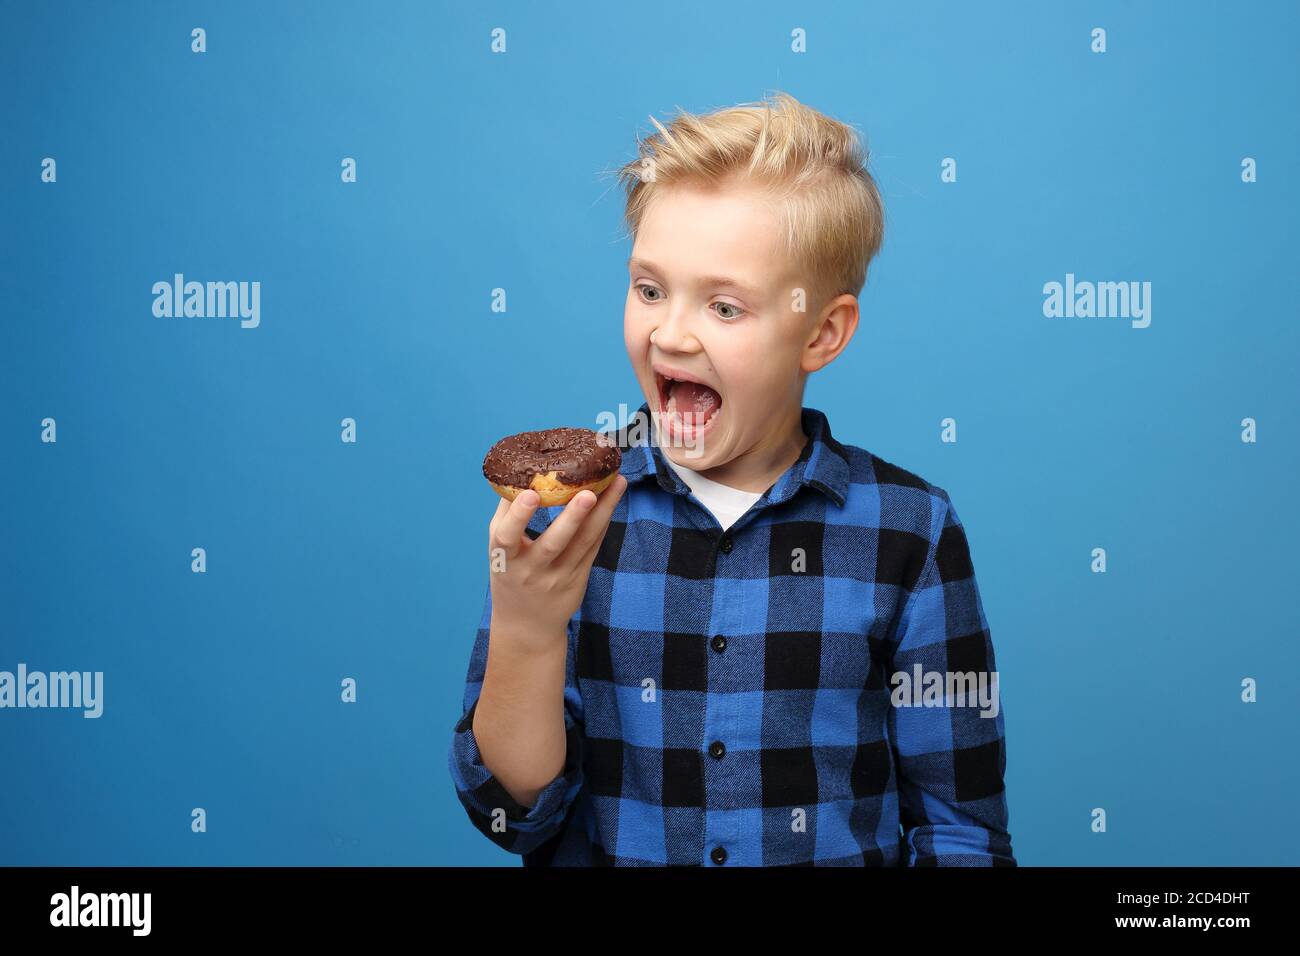 Sweets, smiling boy with a sweet donut. Cheerful boy eating a sweet dessert, smiling boy on a blue background Stock Photo